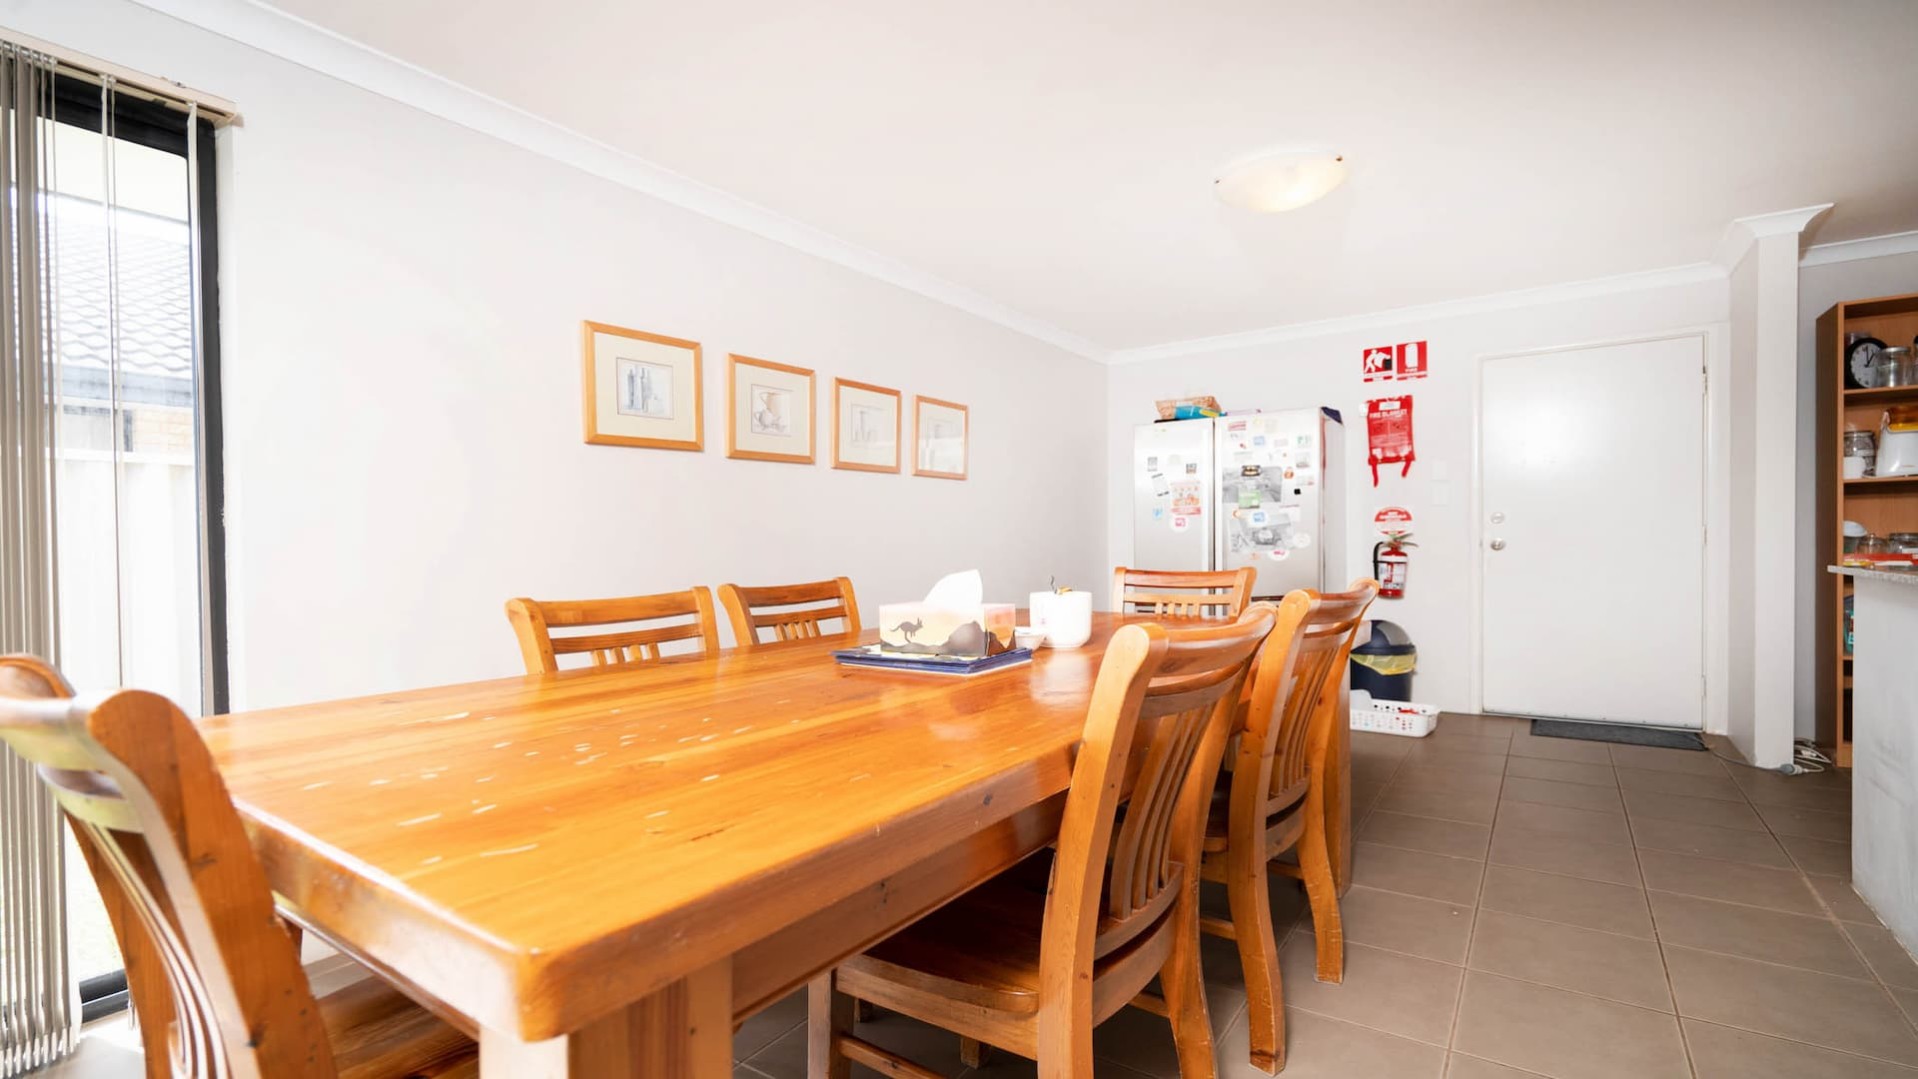 --Dining area with a large wooden table with six seats.--